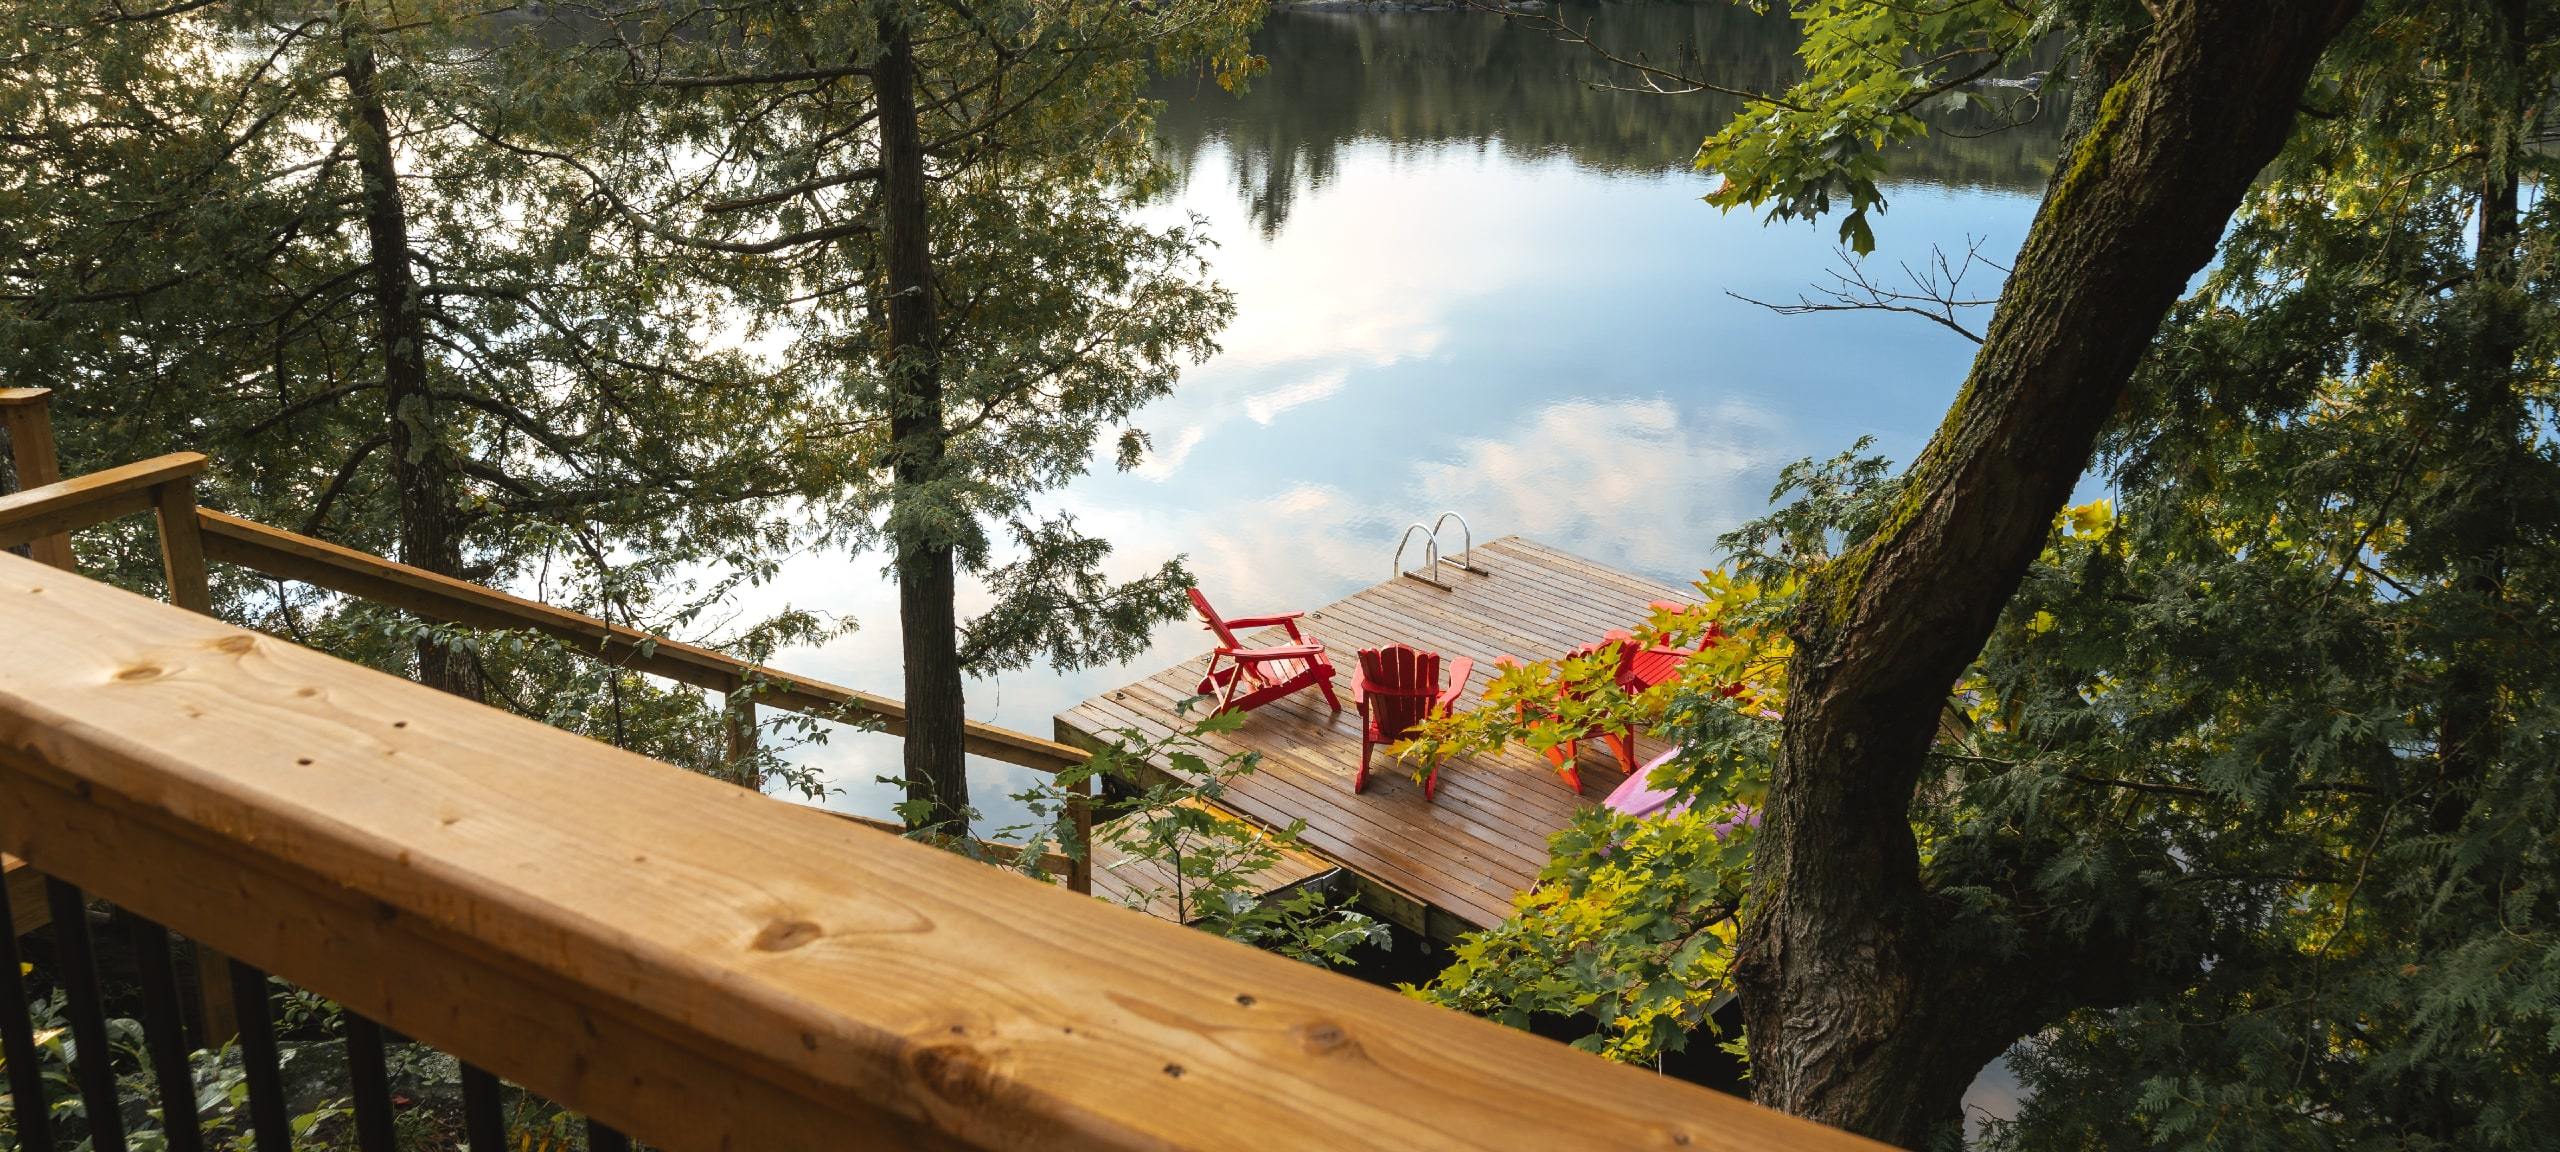 View of dock and lake from Muskoka home